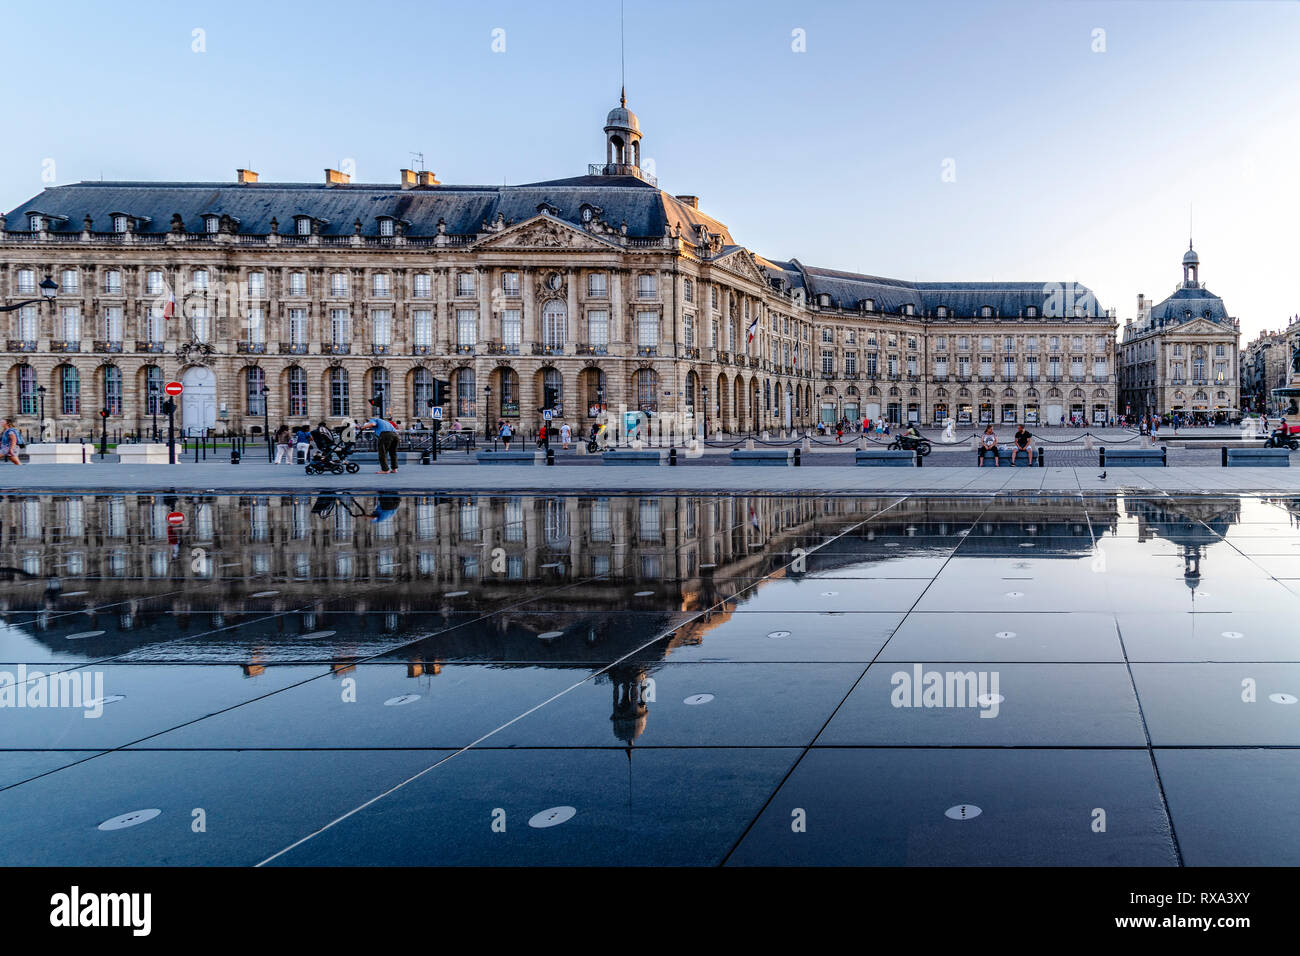 Palace reflecting in water mirror at city Stock Photo